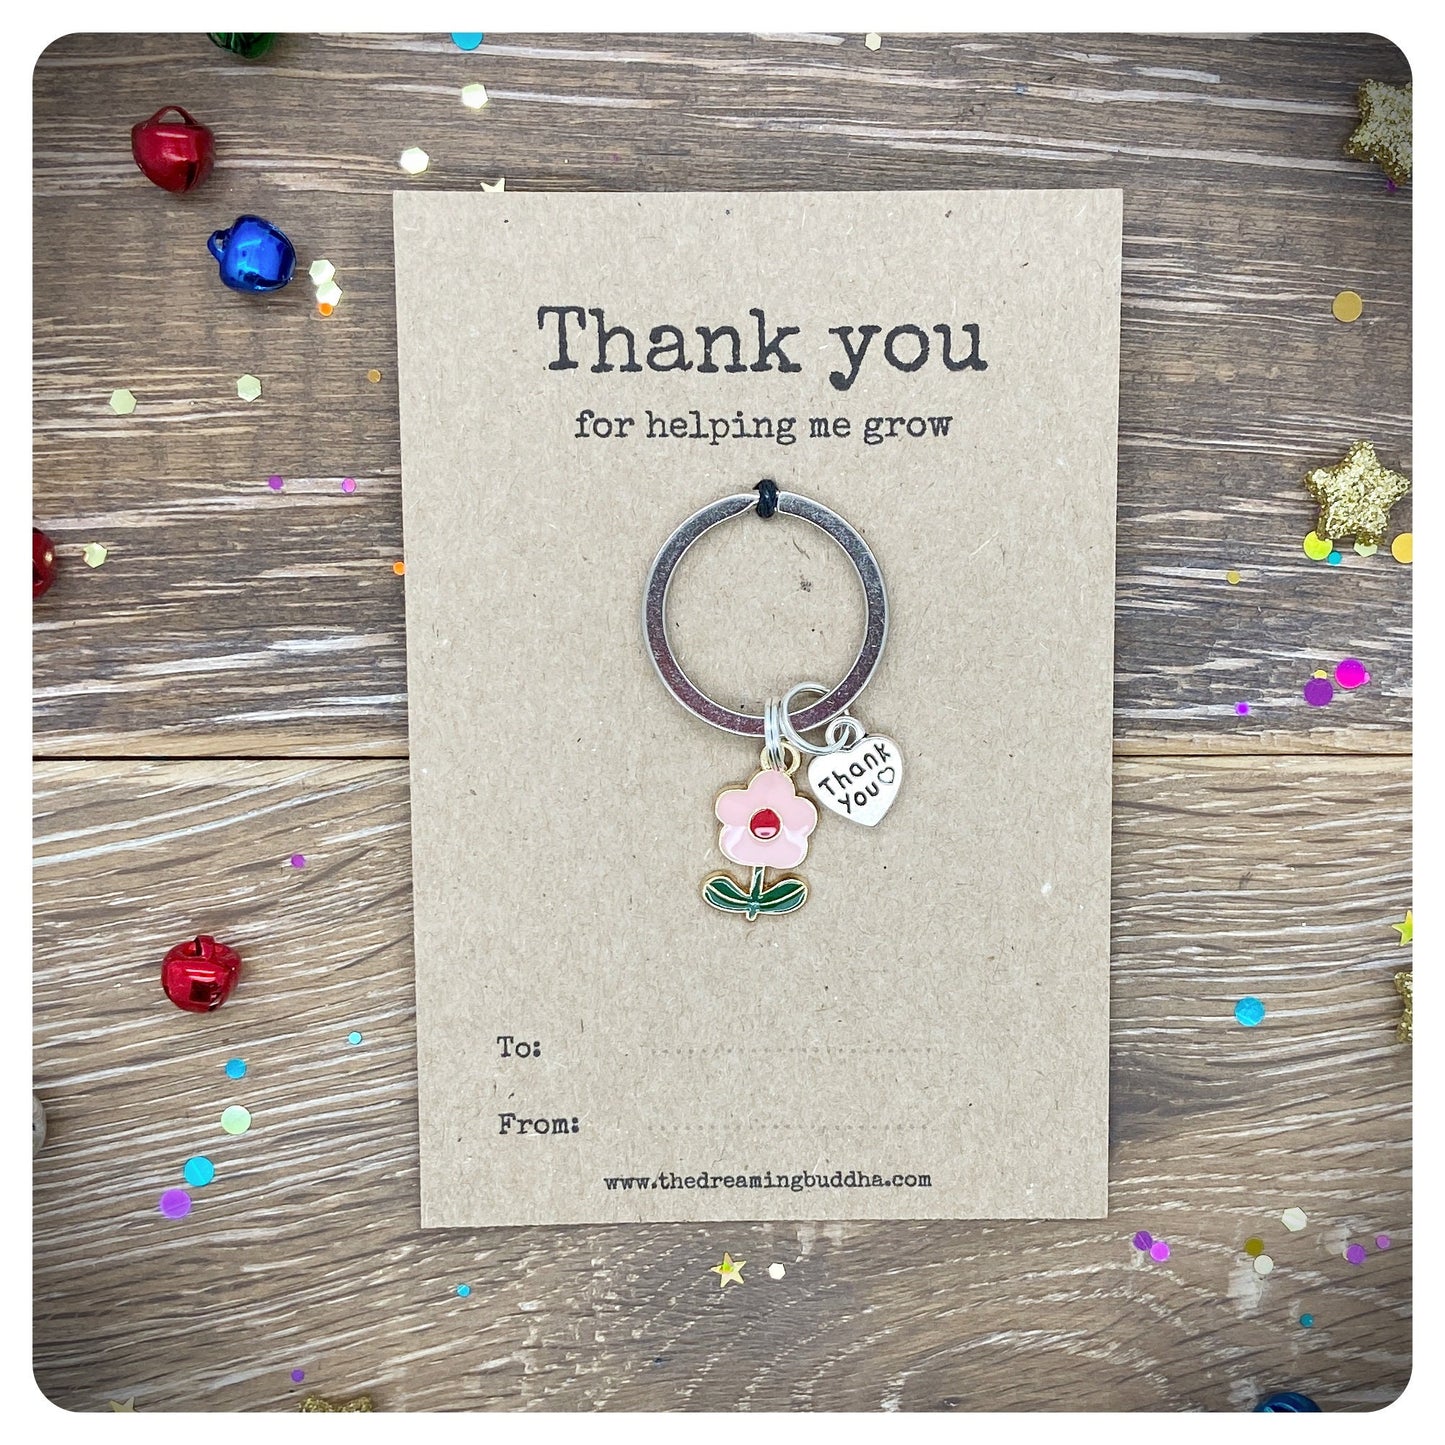 Set Of 4 School Teacher End Of Term Gifts, Pack Of Four Thank You For Helping Me Grow Keyrings, 4 Flower Keychains